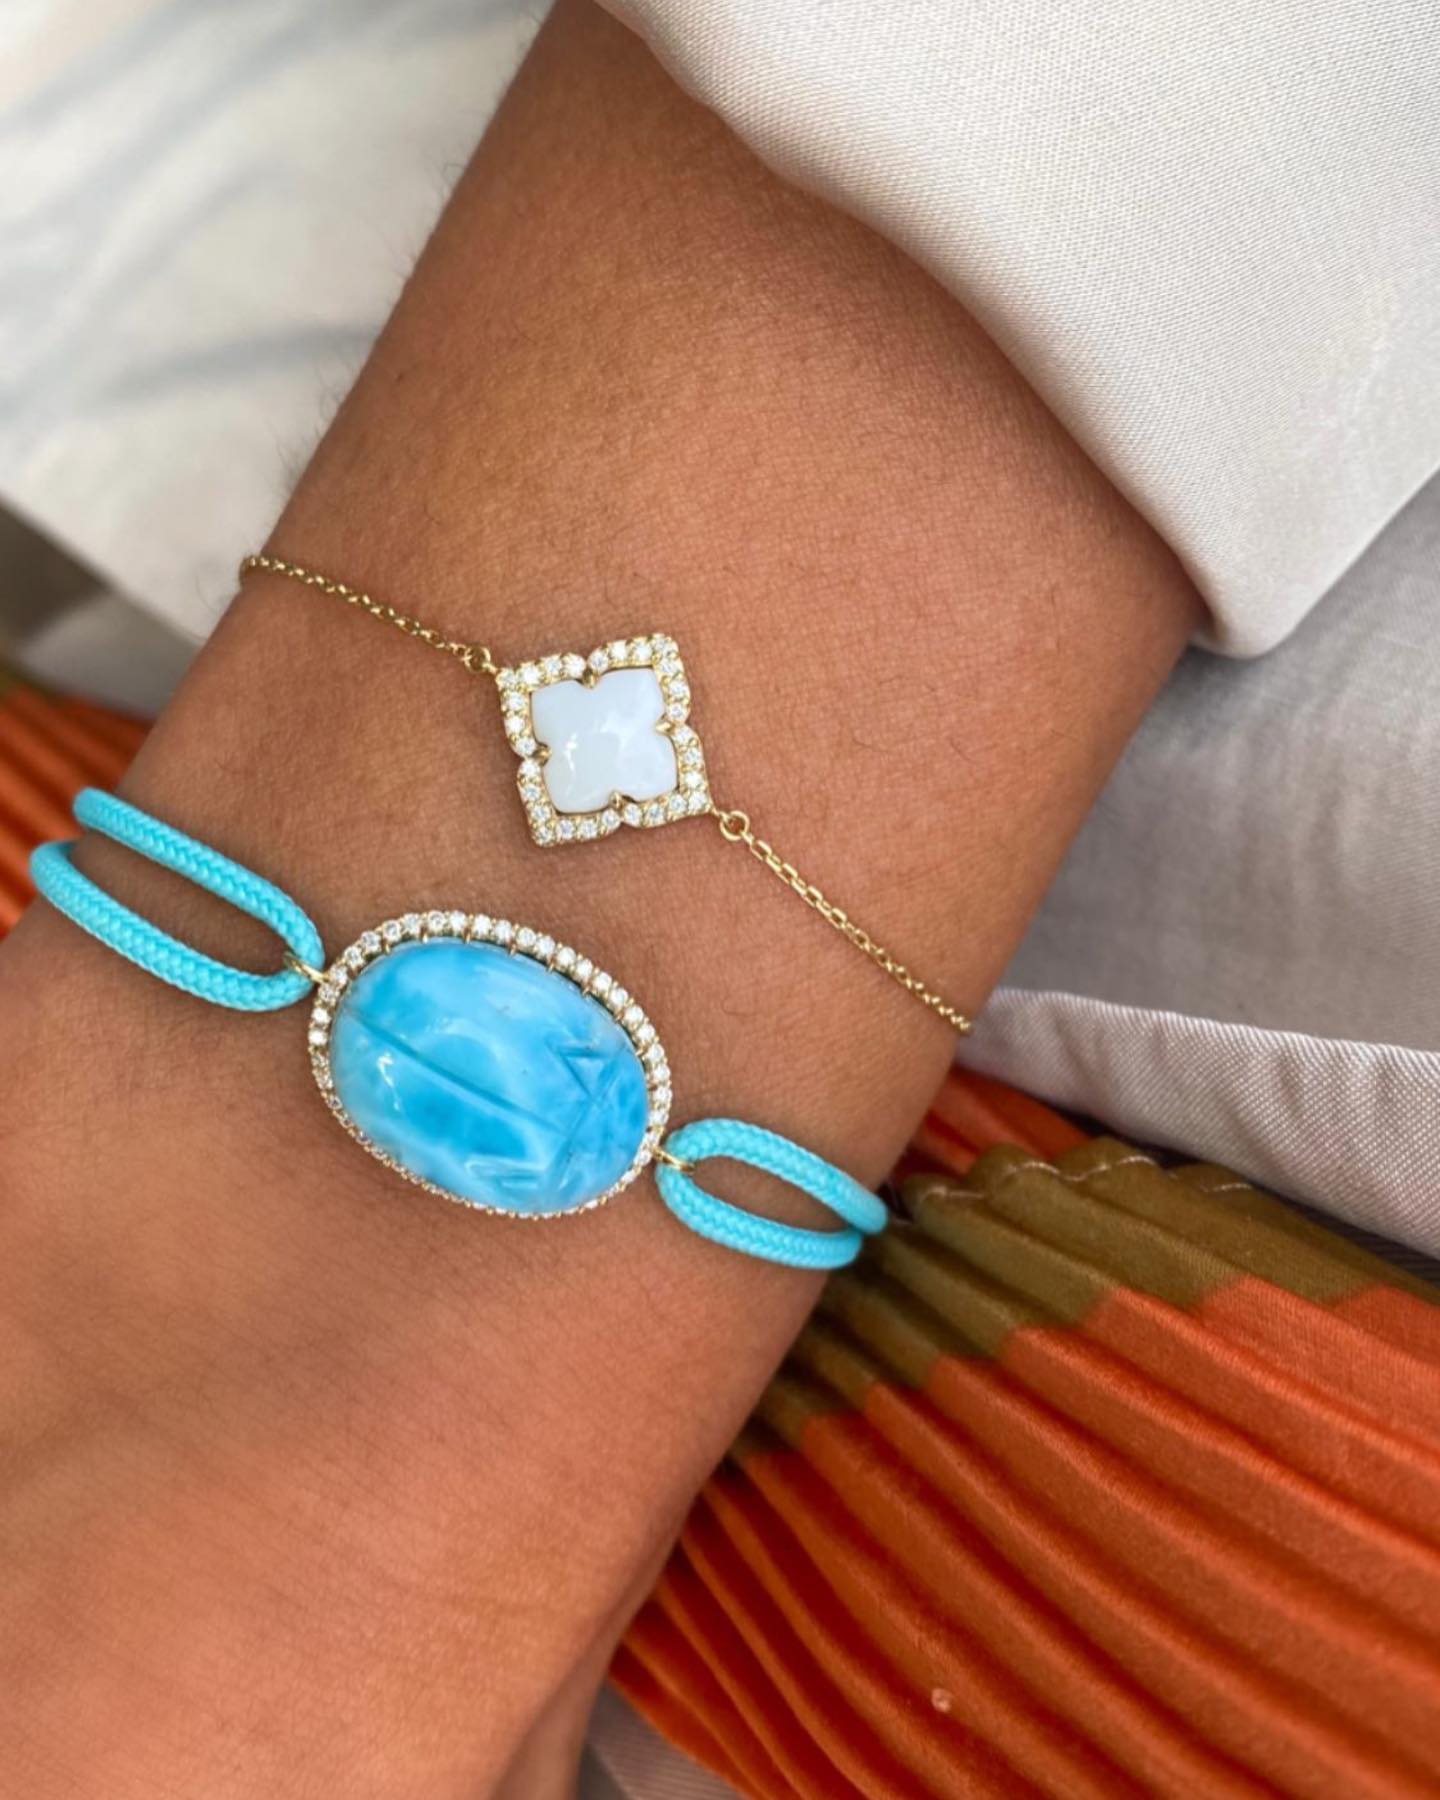 No new friends #myritazia ❤️ Gold Chakra Bracelet in White Agate and Diamonds & our very Special Monochrome Cord Gold Scarabée in Larimar and Diamonds